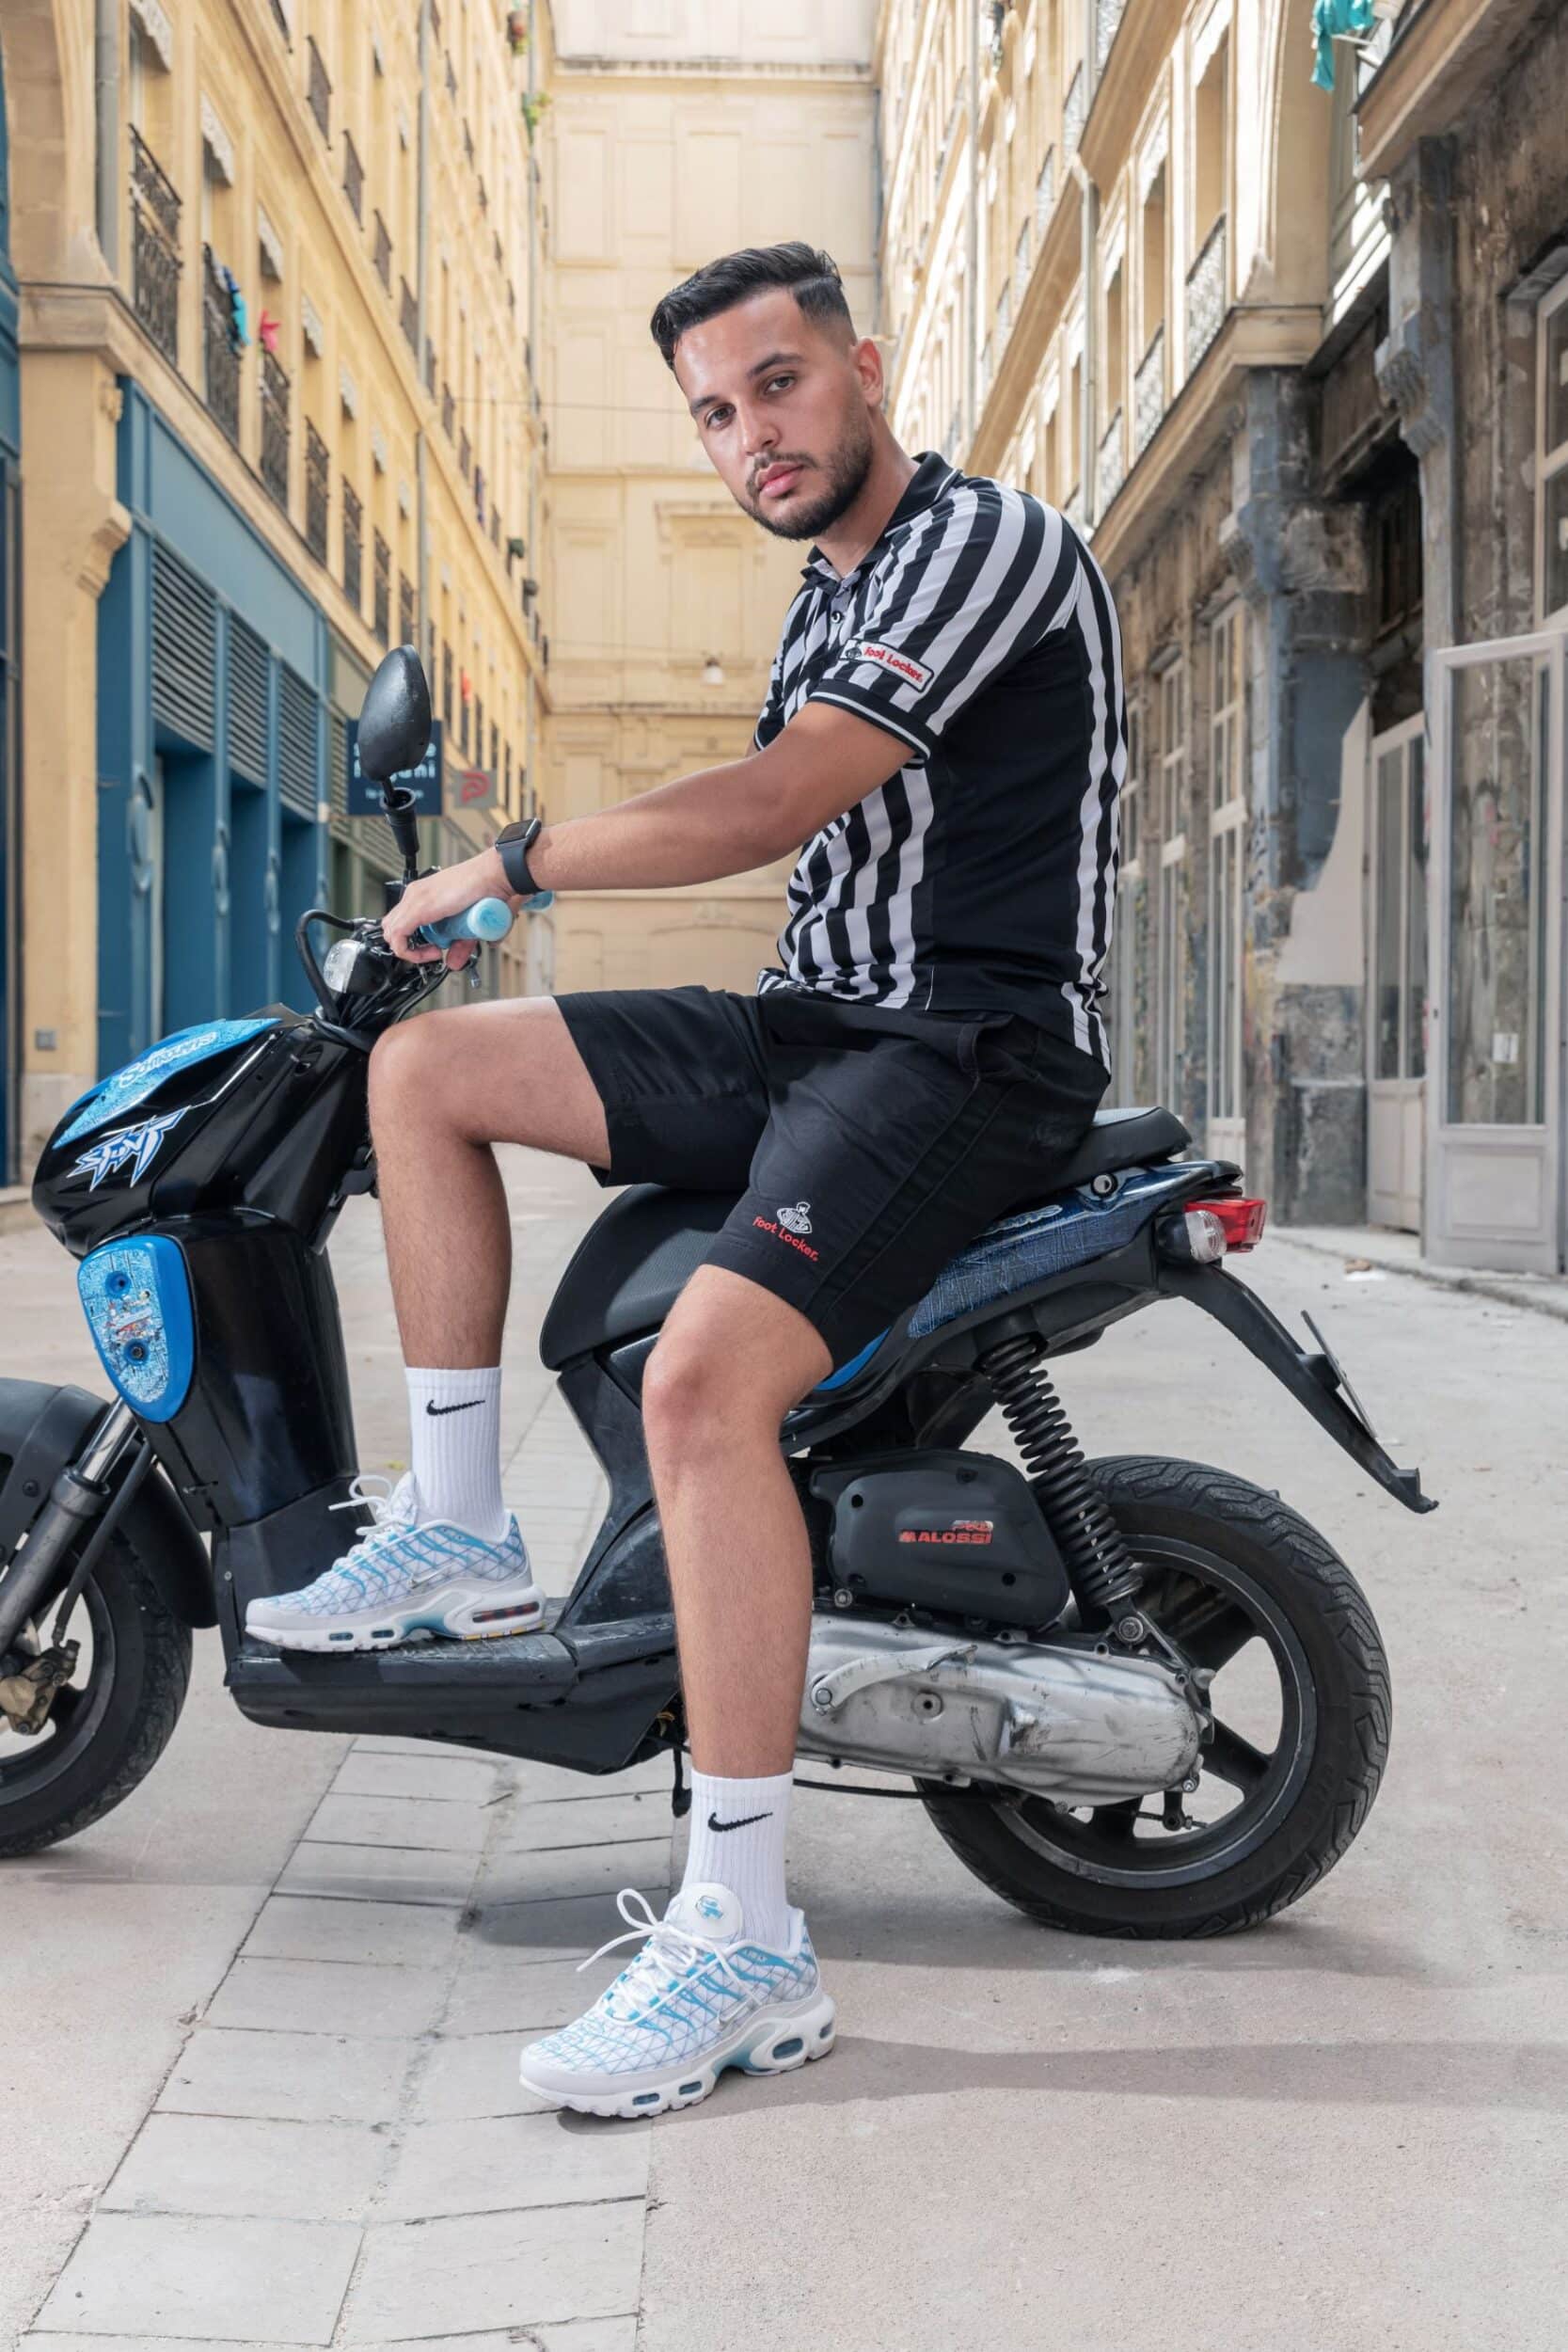 Foot Locker Europe celebrates Marseille with the exclusive Nike TN  Marseille - FLAVOURMAG